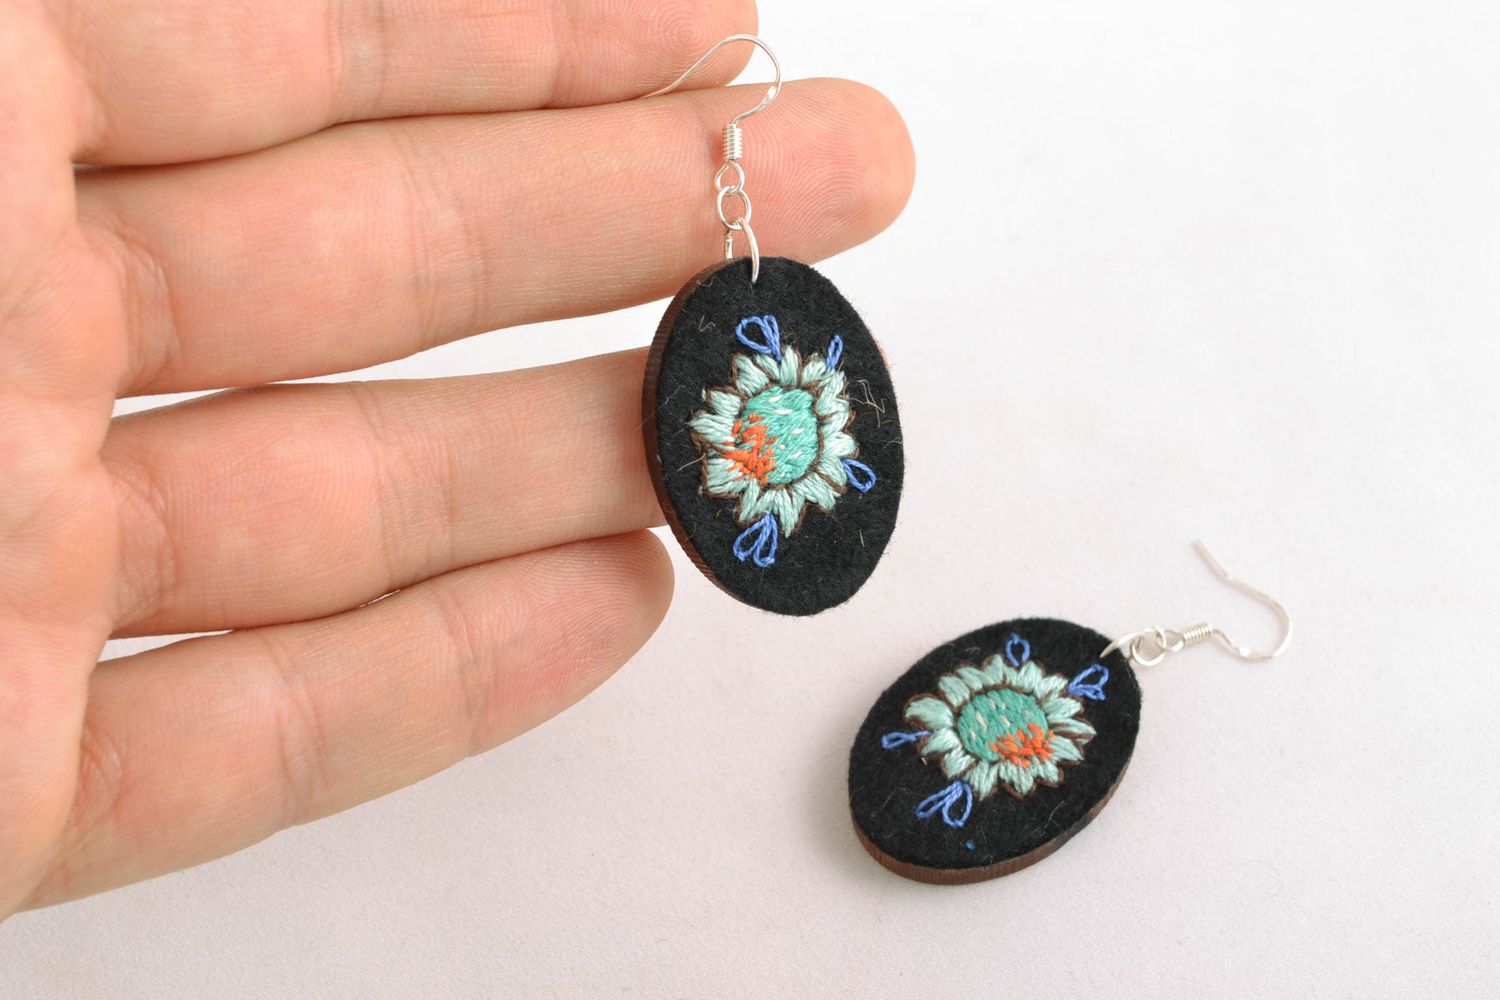 Oval earrings made of wood and felt with embroidery photo 2